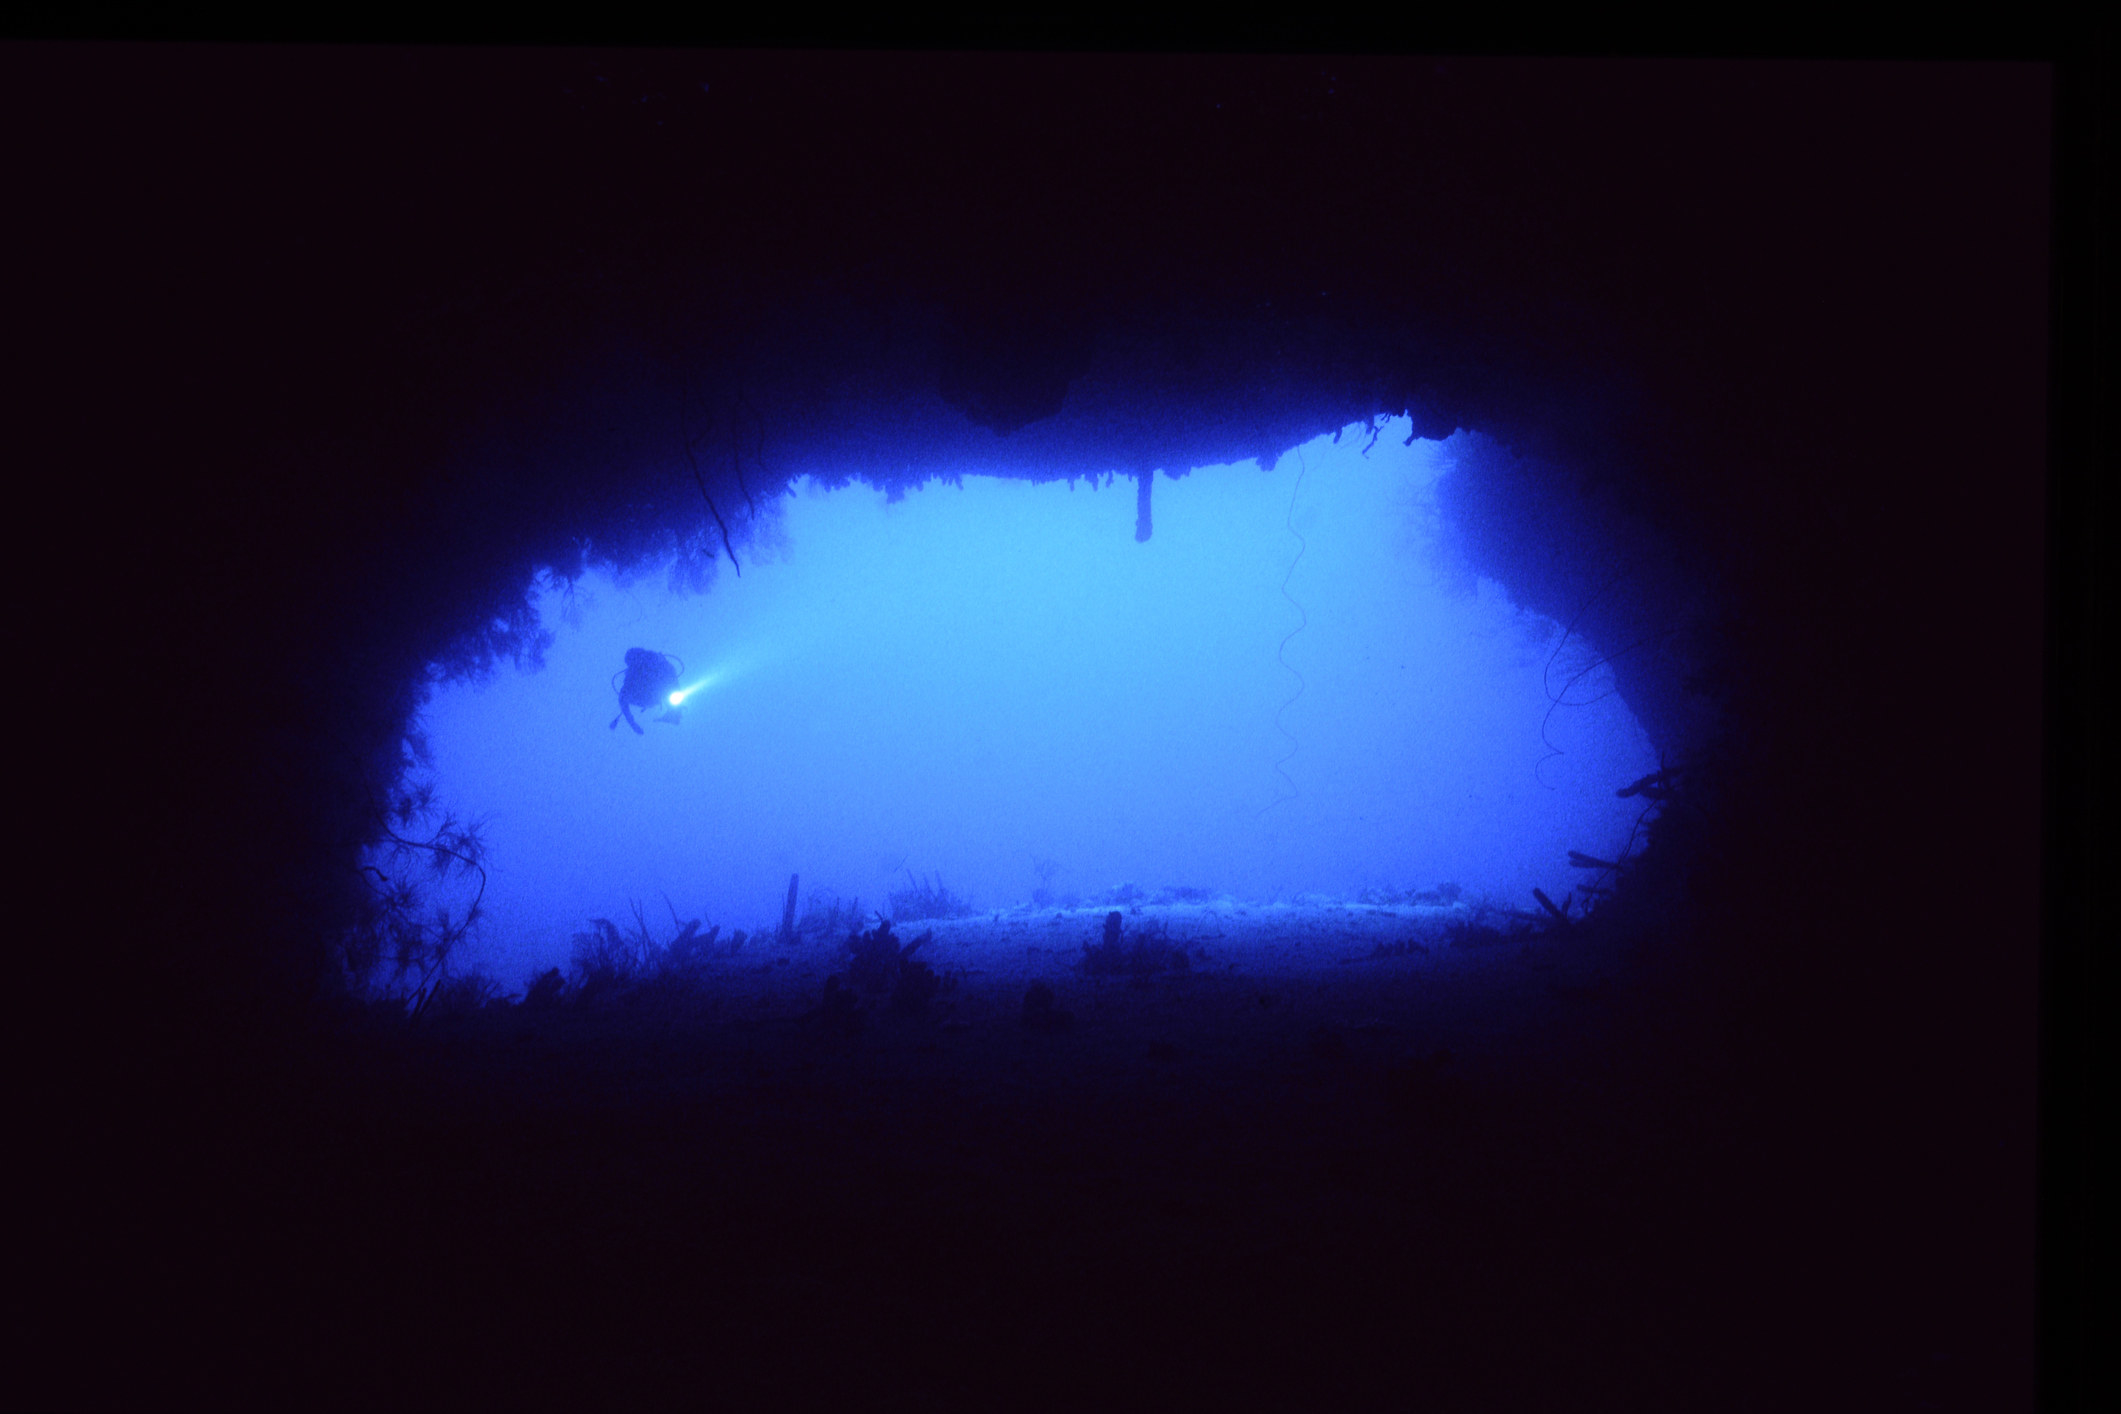 A underwater cave diver about to swim into a dark cave